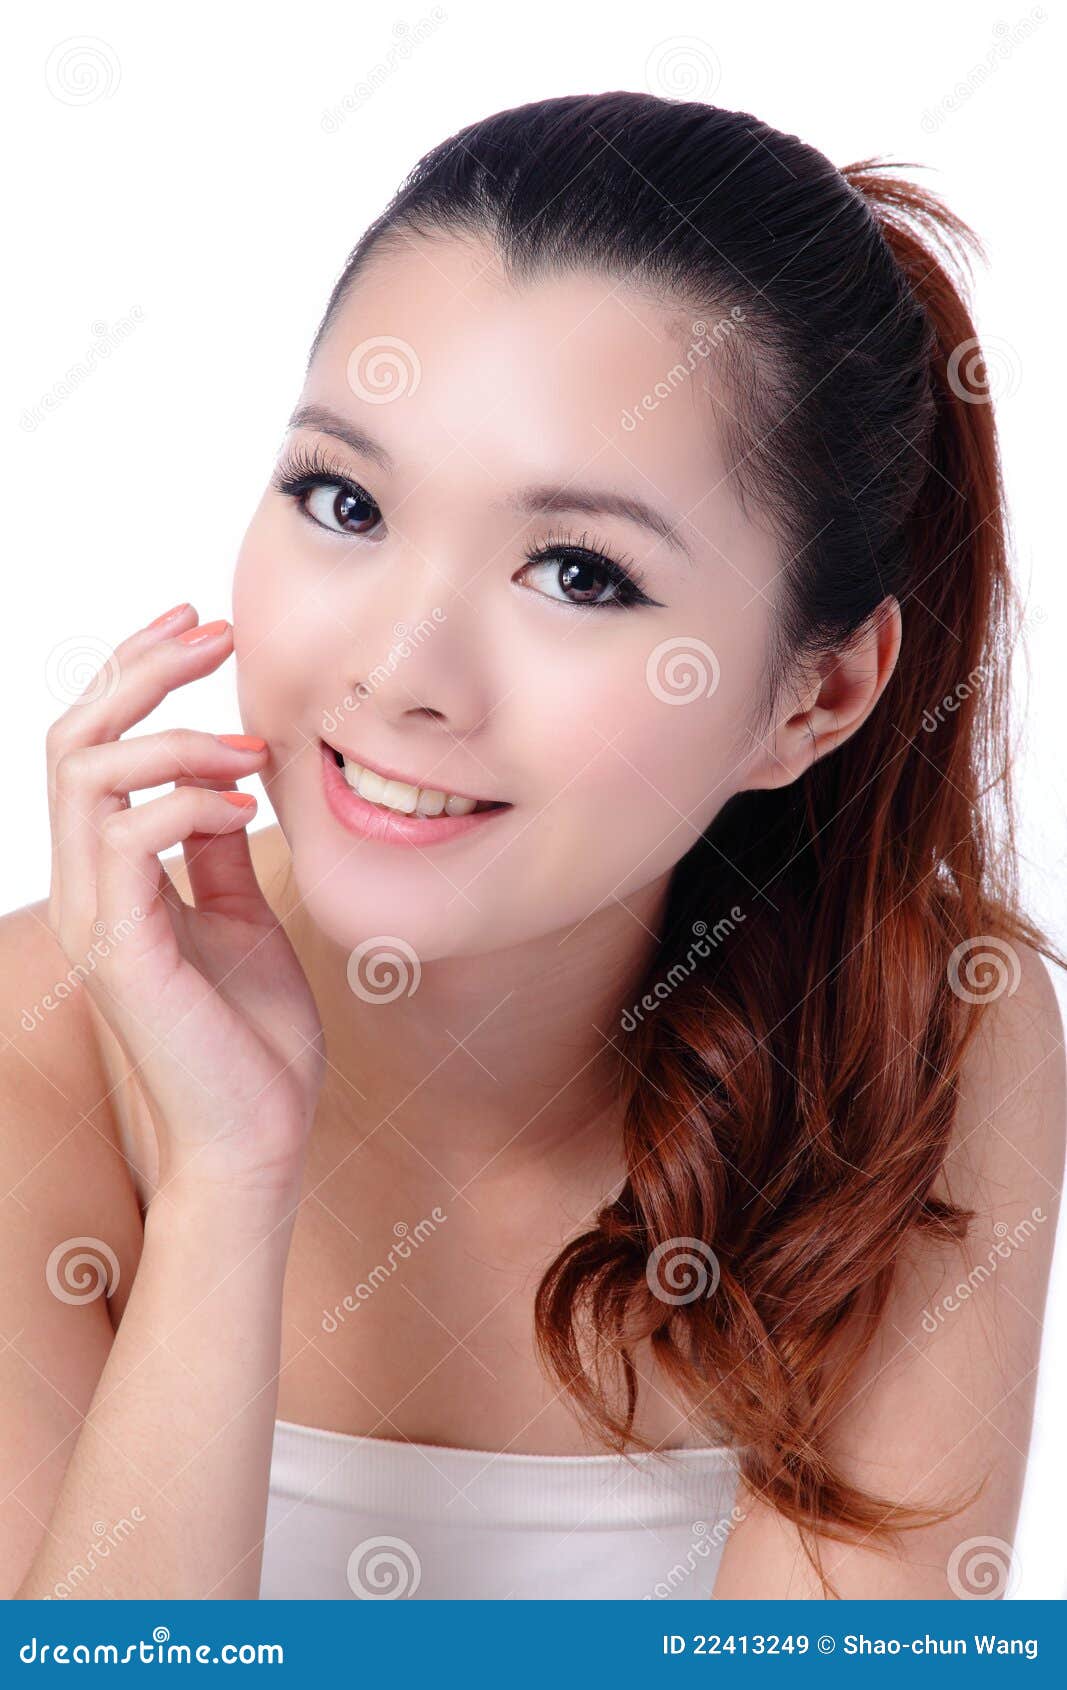 https://thumbs.dreamstime.com/z/asian-beauty-skin-care-woman-smiling-close-up-22413249.jpg